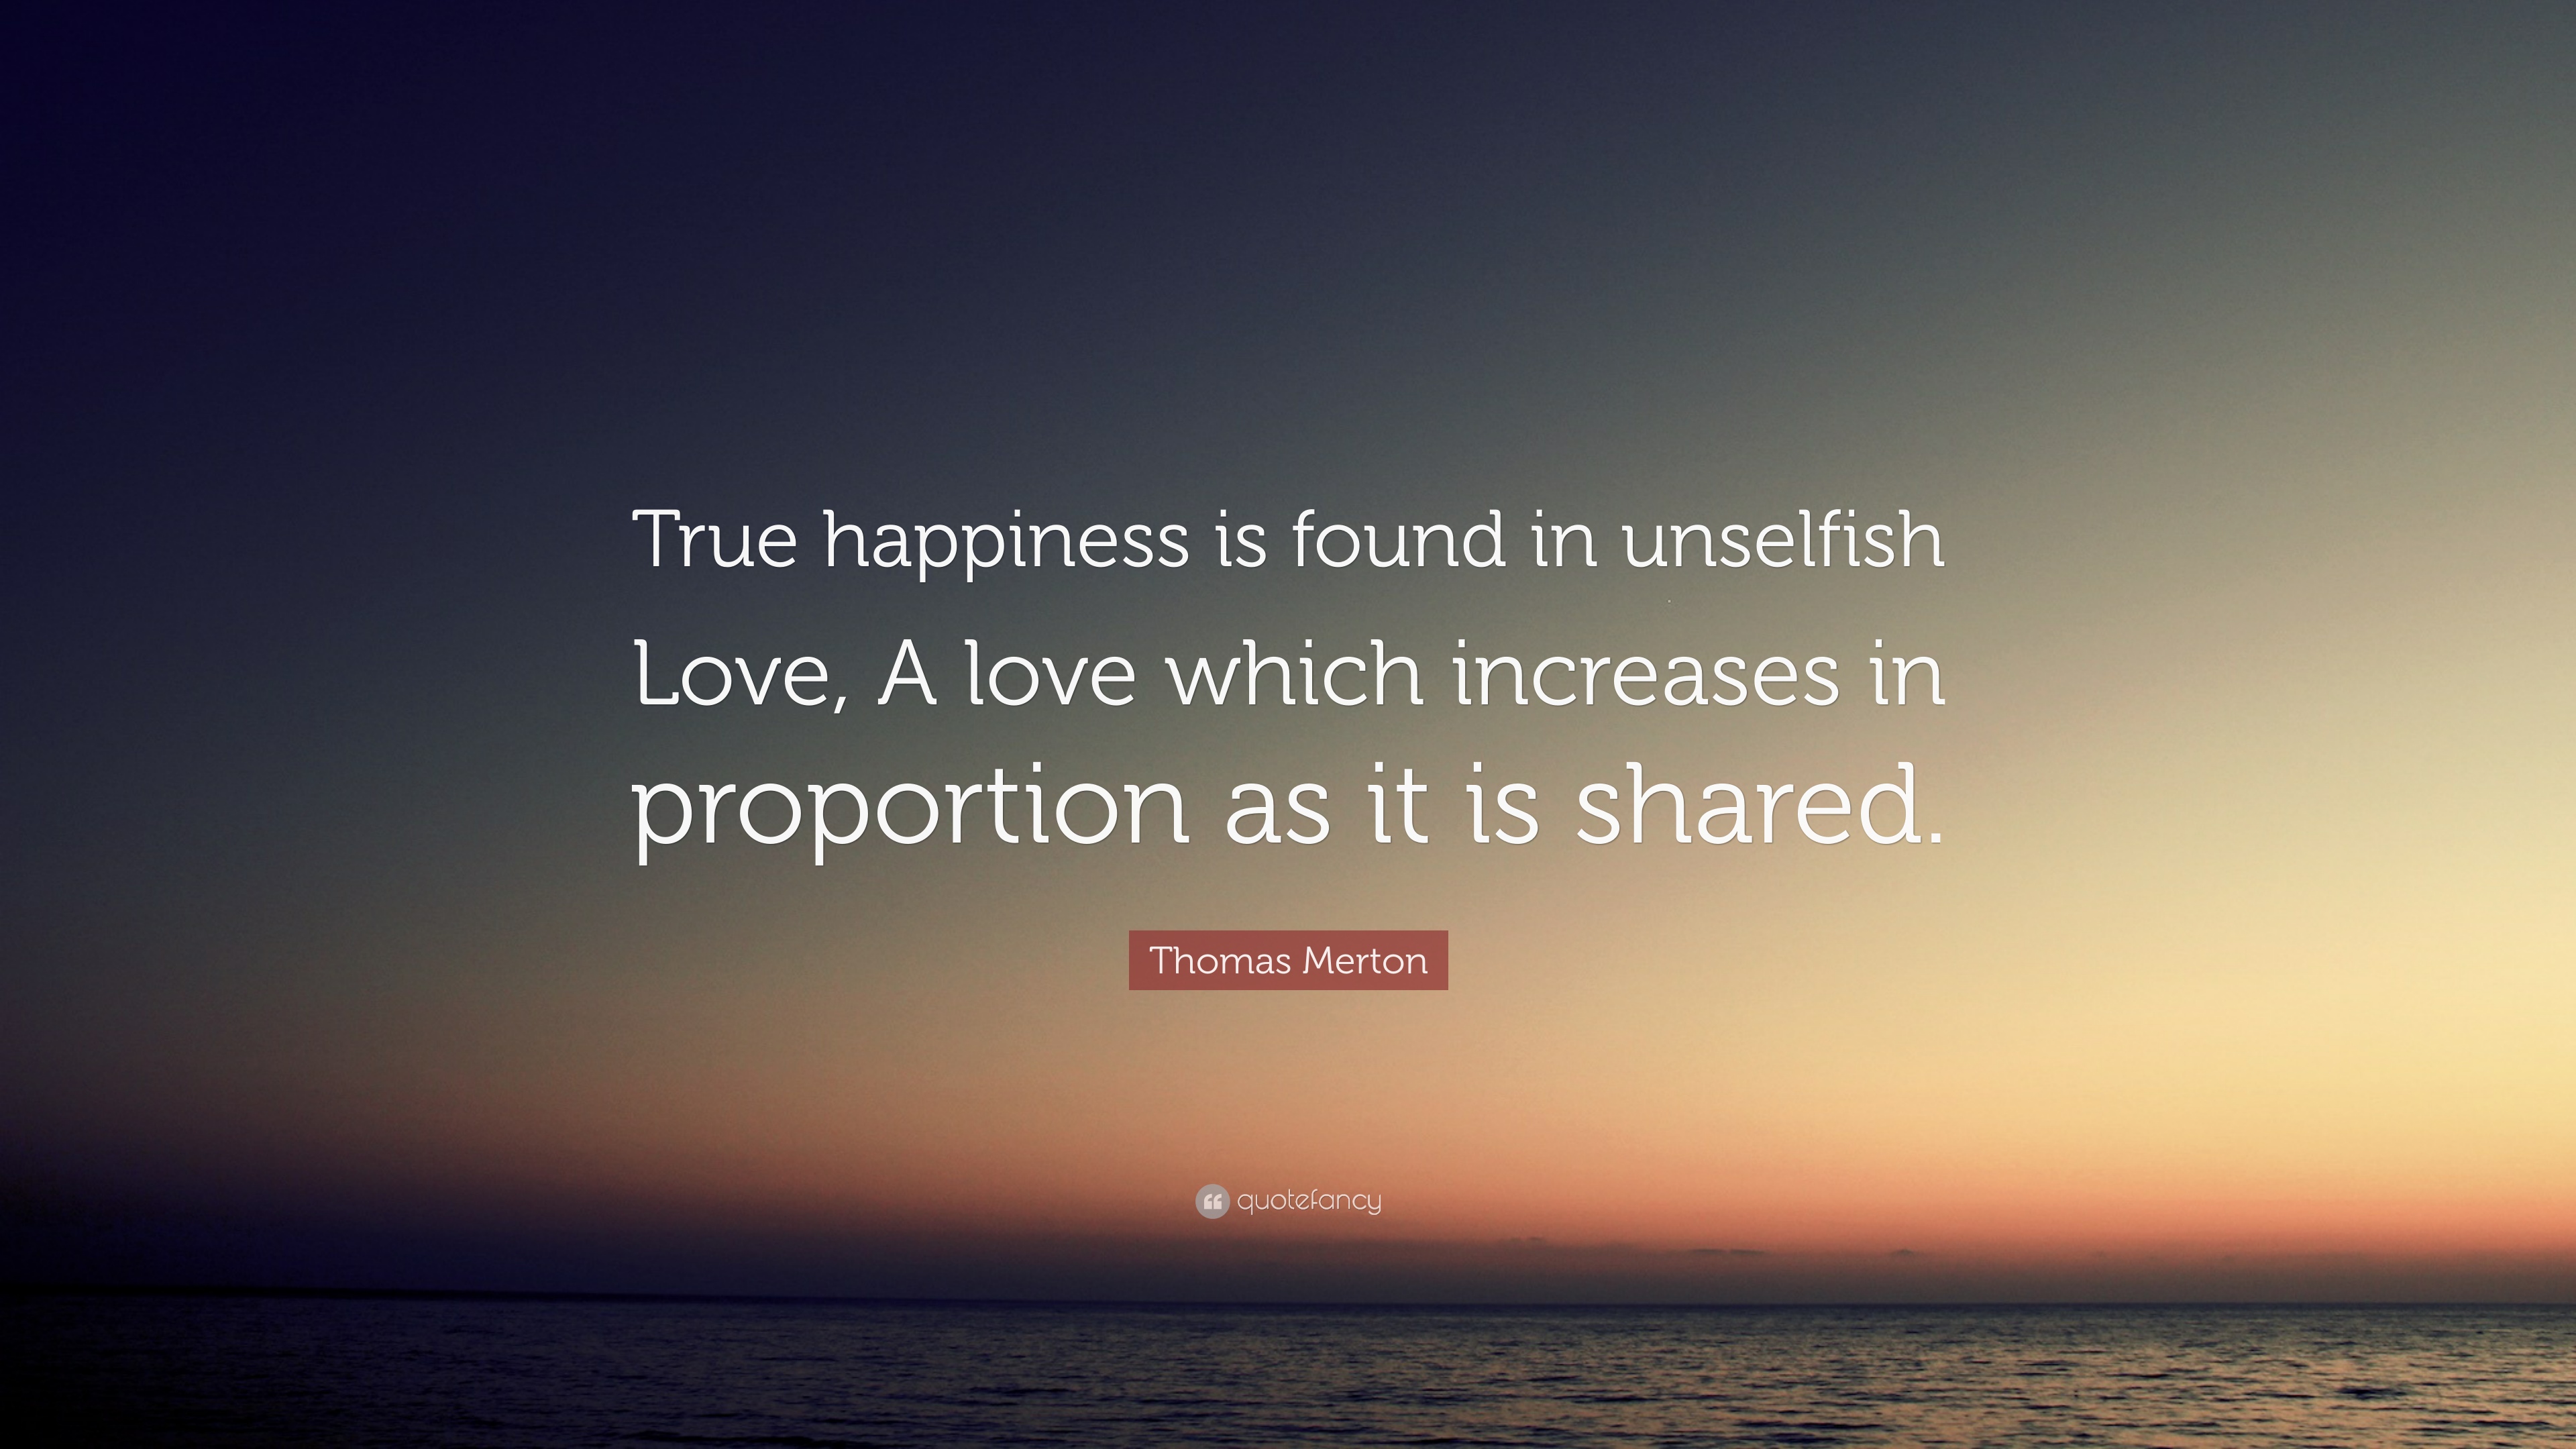 Thomas Merton Quote: “True happiness is found in unselfish Love, A ...